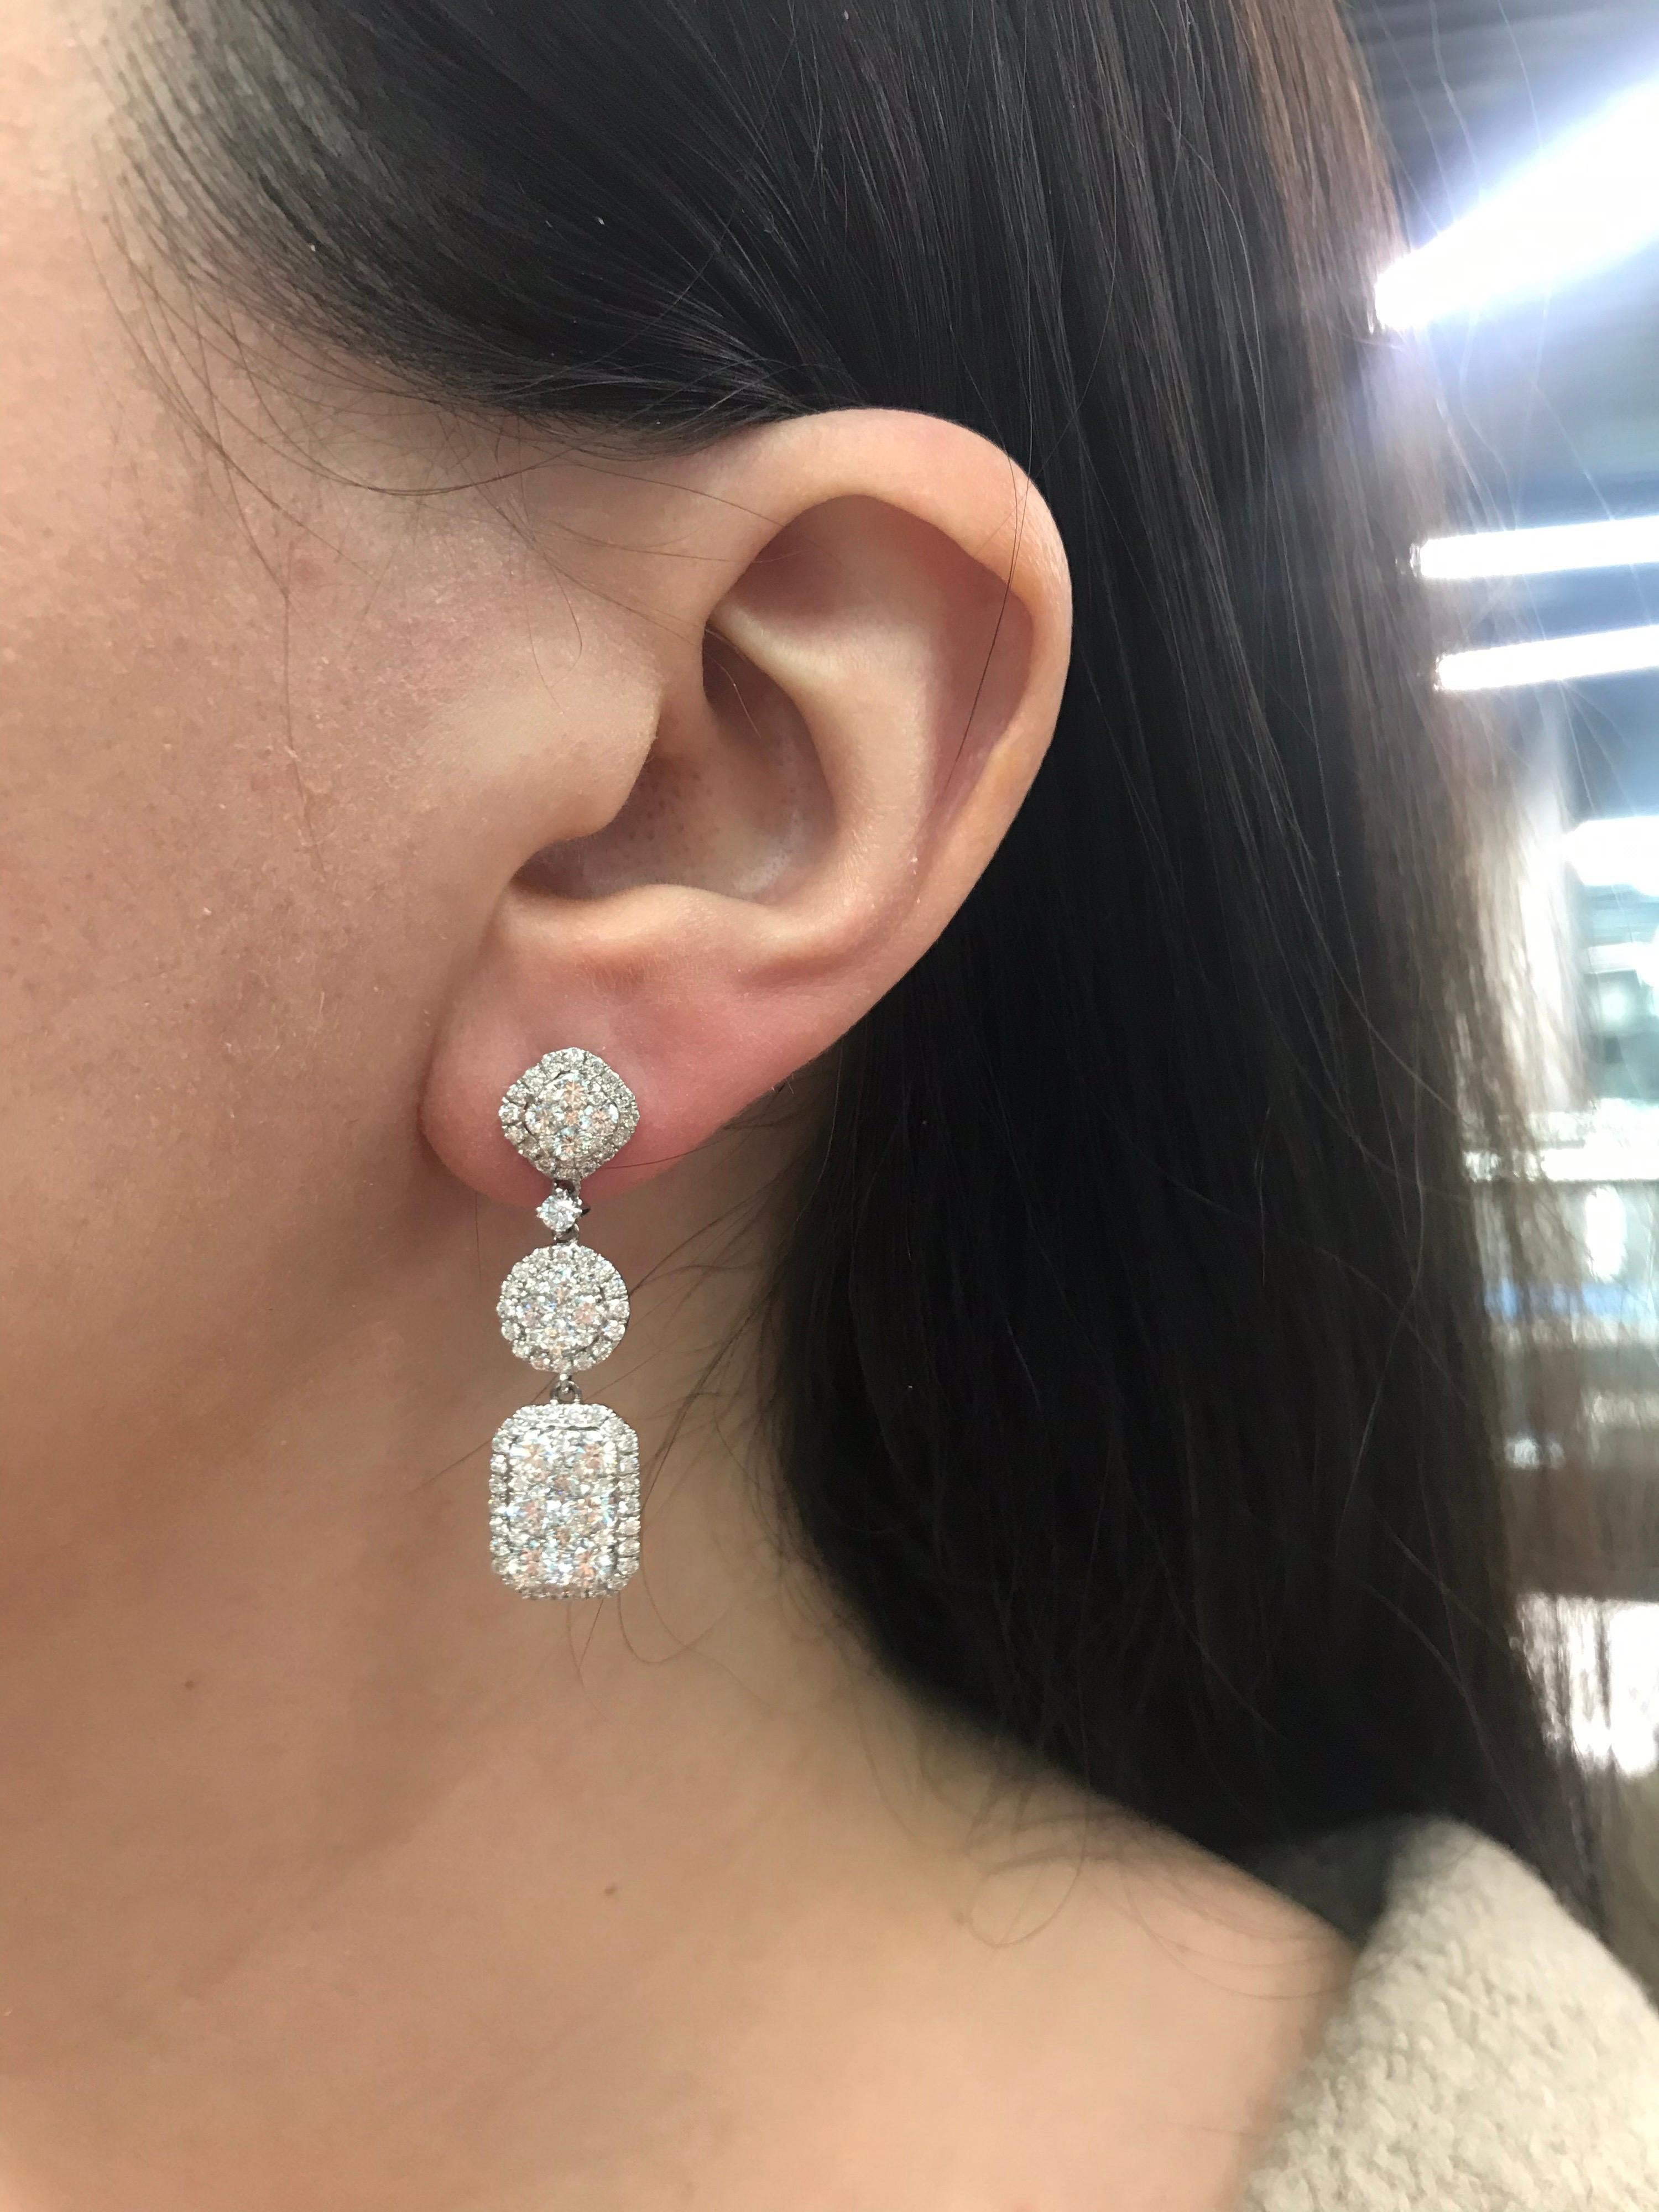 18K White gold drop earrings featuring 170 round brilliants weighing 2.41 carats and 12 round brilliants weighing 1.94 carats. 
Color G
Clarity SI

Great looking on!